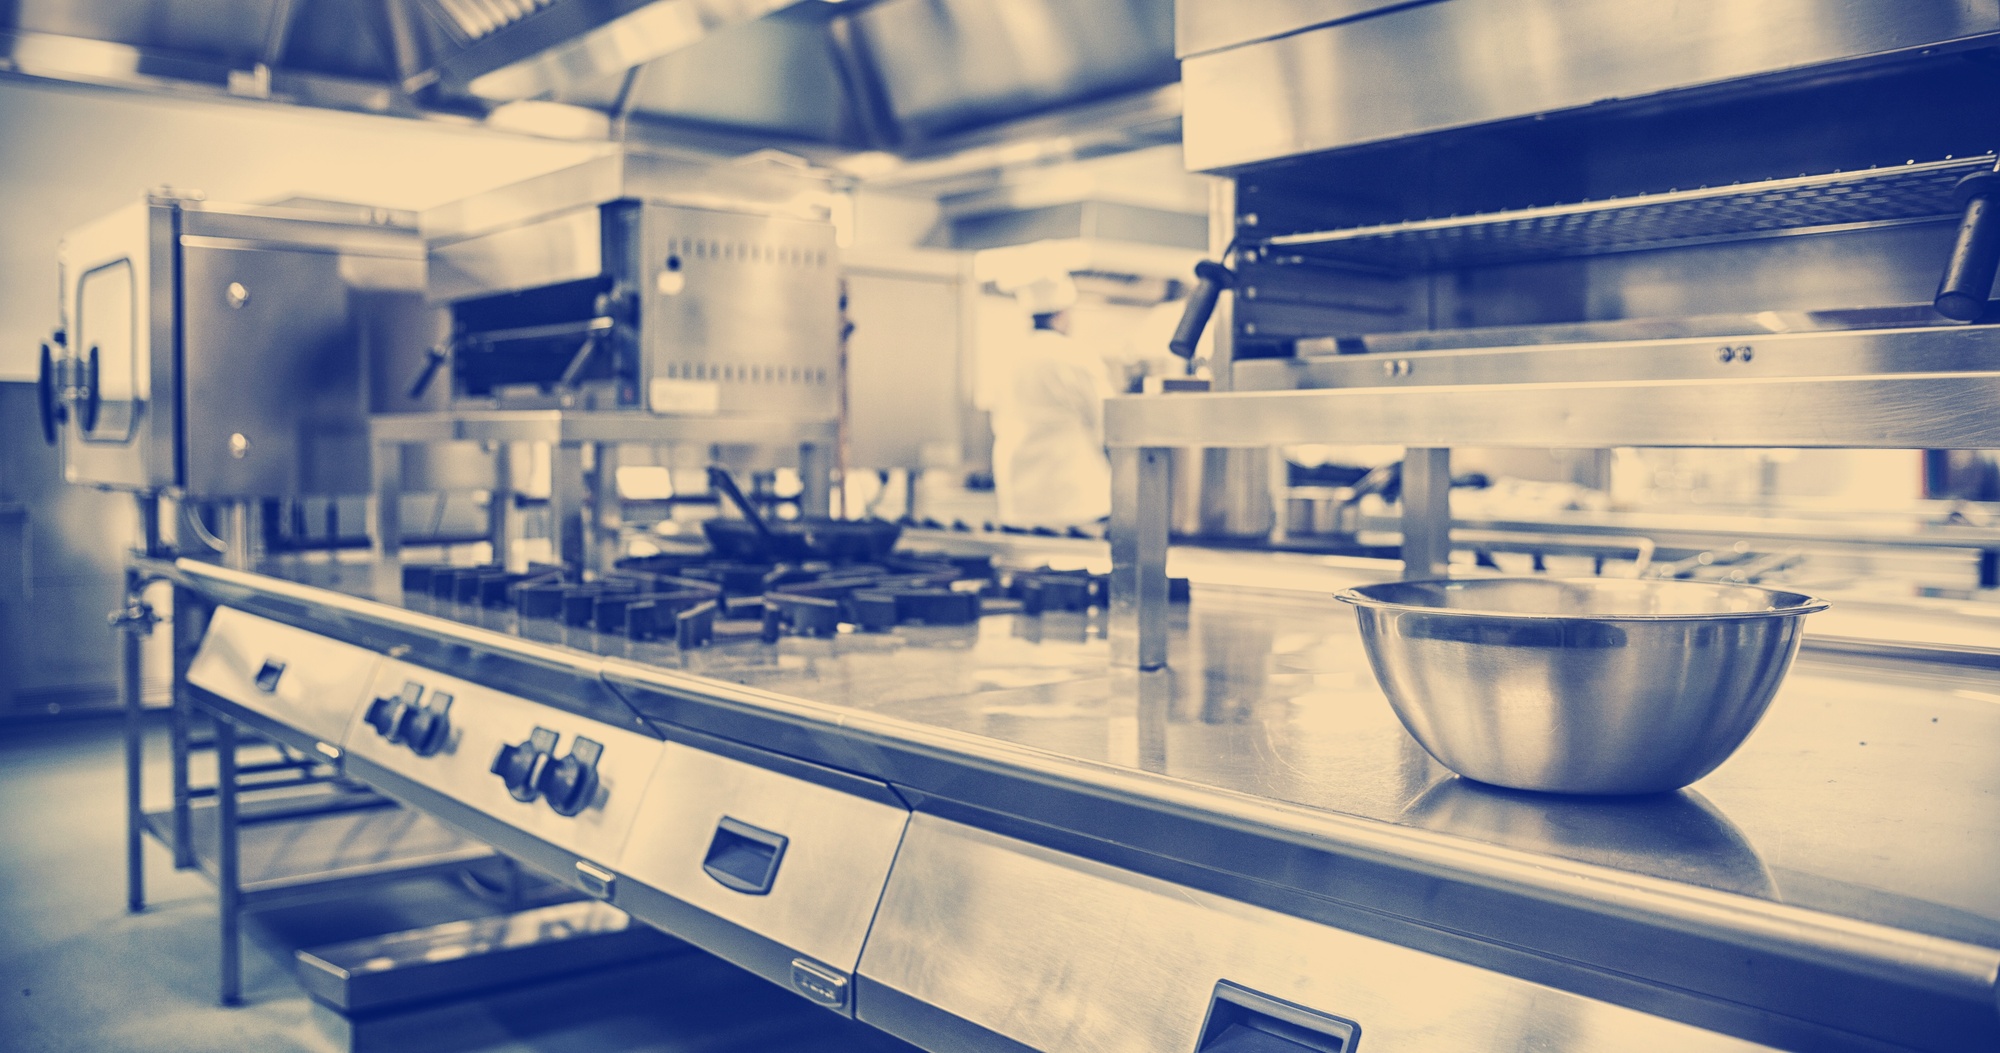 Fire_Protection_Systems_for_Industrial_Cooking_Market